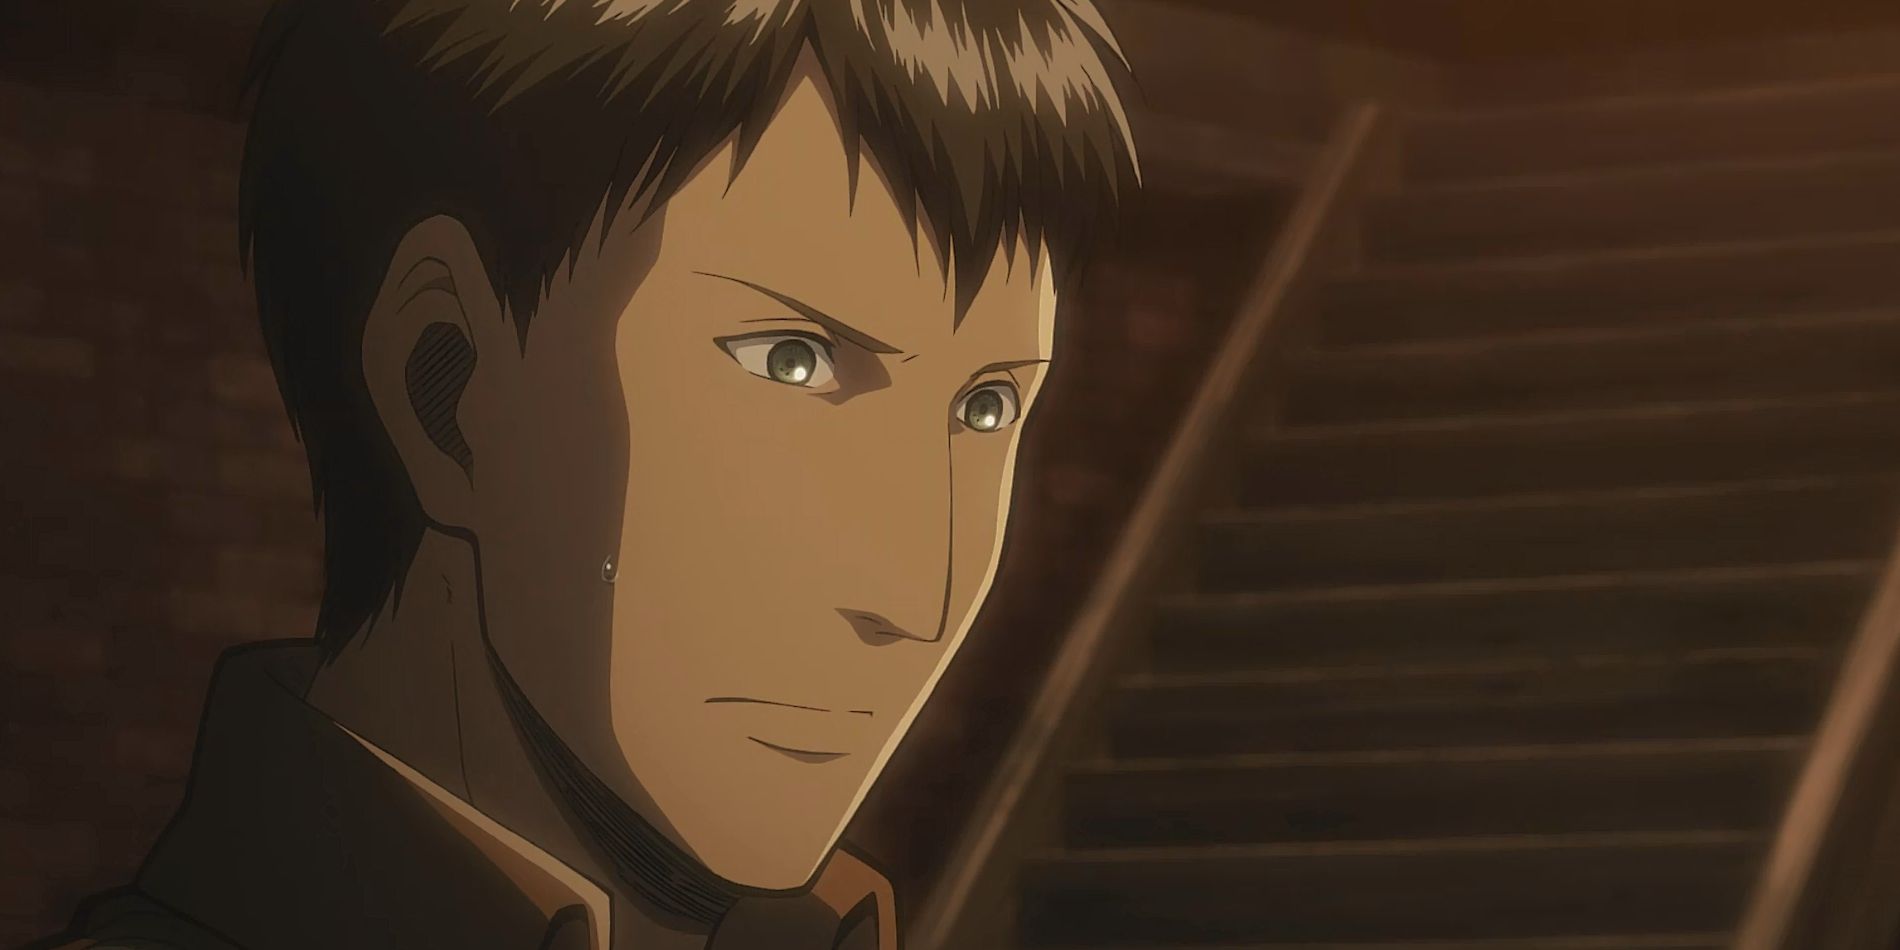 Bertholdt Hoover from Attack on Titan